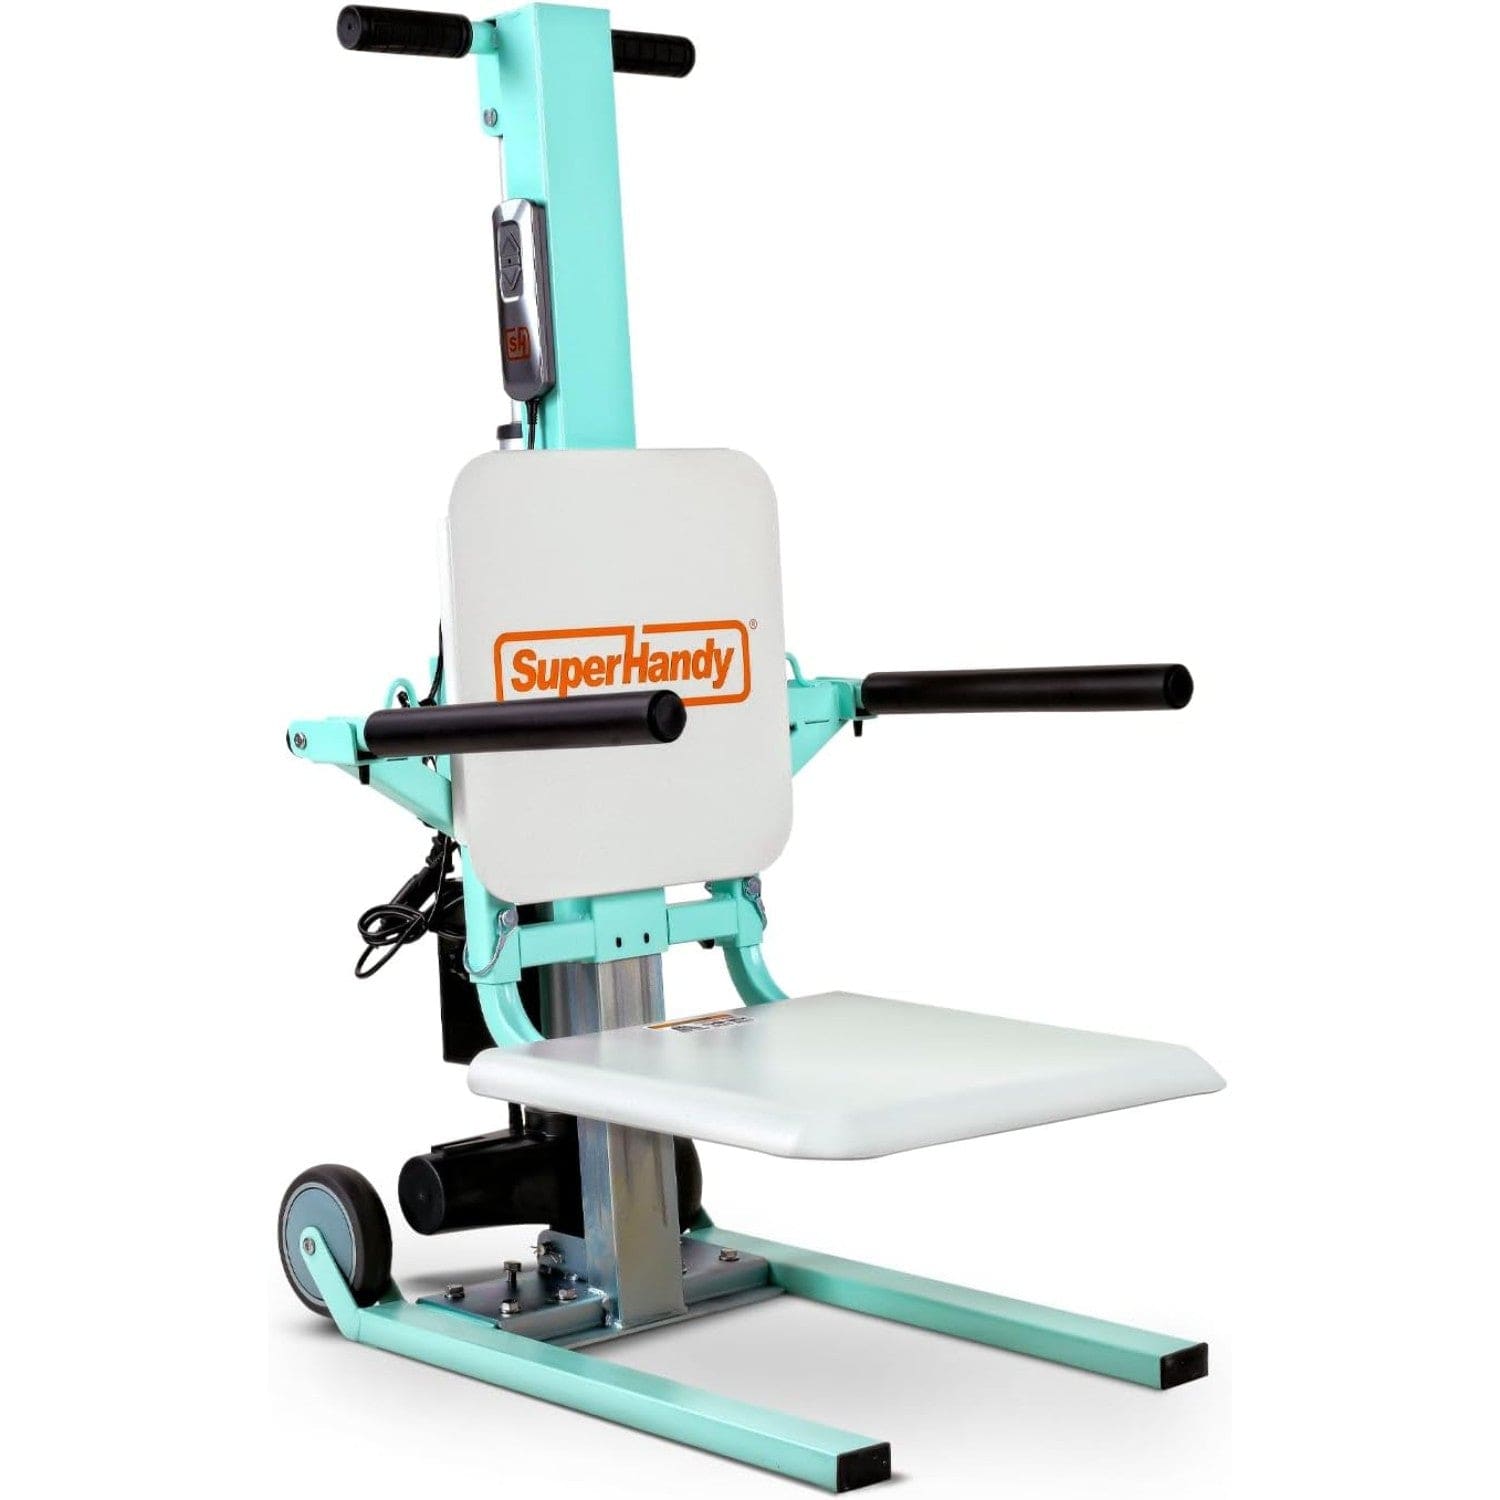 SuperHandy Electric Floor Lift Standing Aid for Seniors & Disabled -  SuperHandy - Shop Outdoor Power Equipment & Mobility